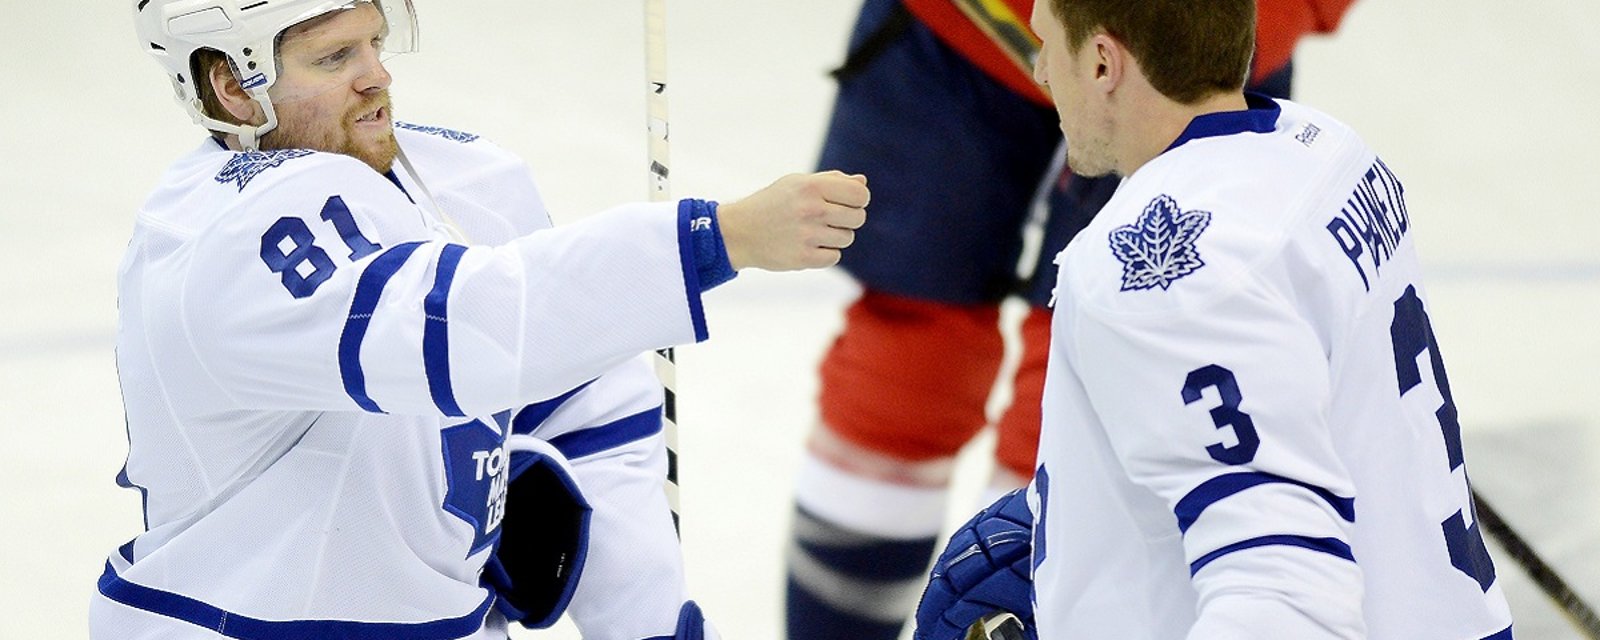 Dion Phaneuf sends a strong warning to former teammate Phil Kessel.